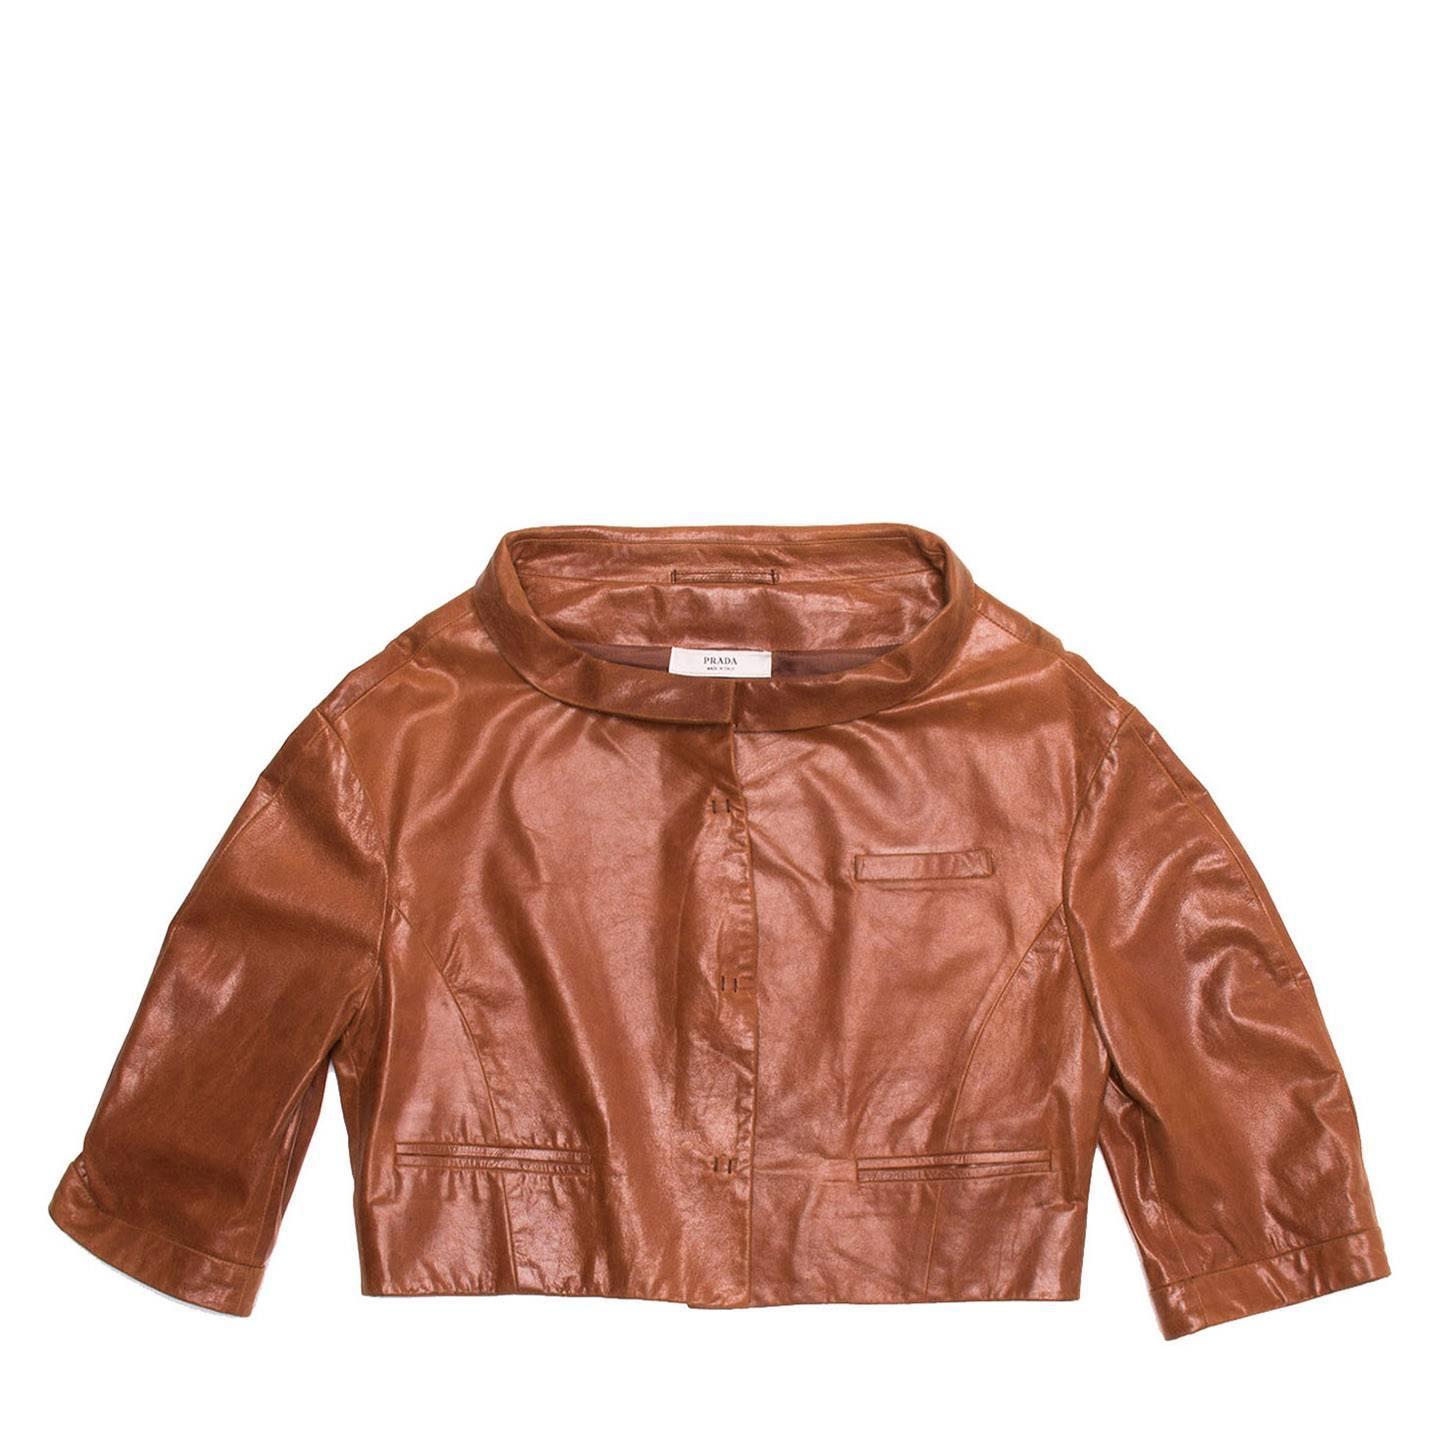 Brown leather cropped jacket with 3/4 length sleeves and snap front buttons.

Size  44 Italian sizing

Condition  Excellent: never worn